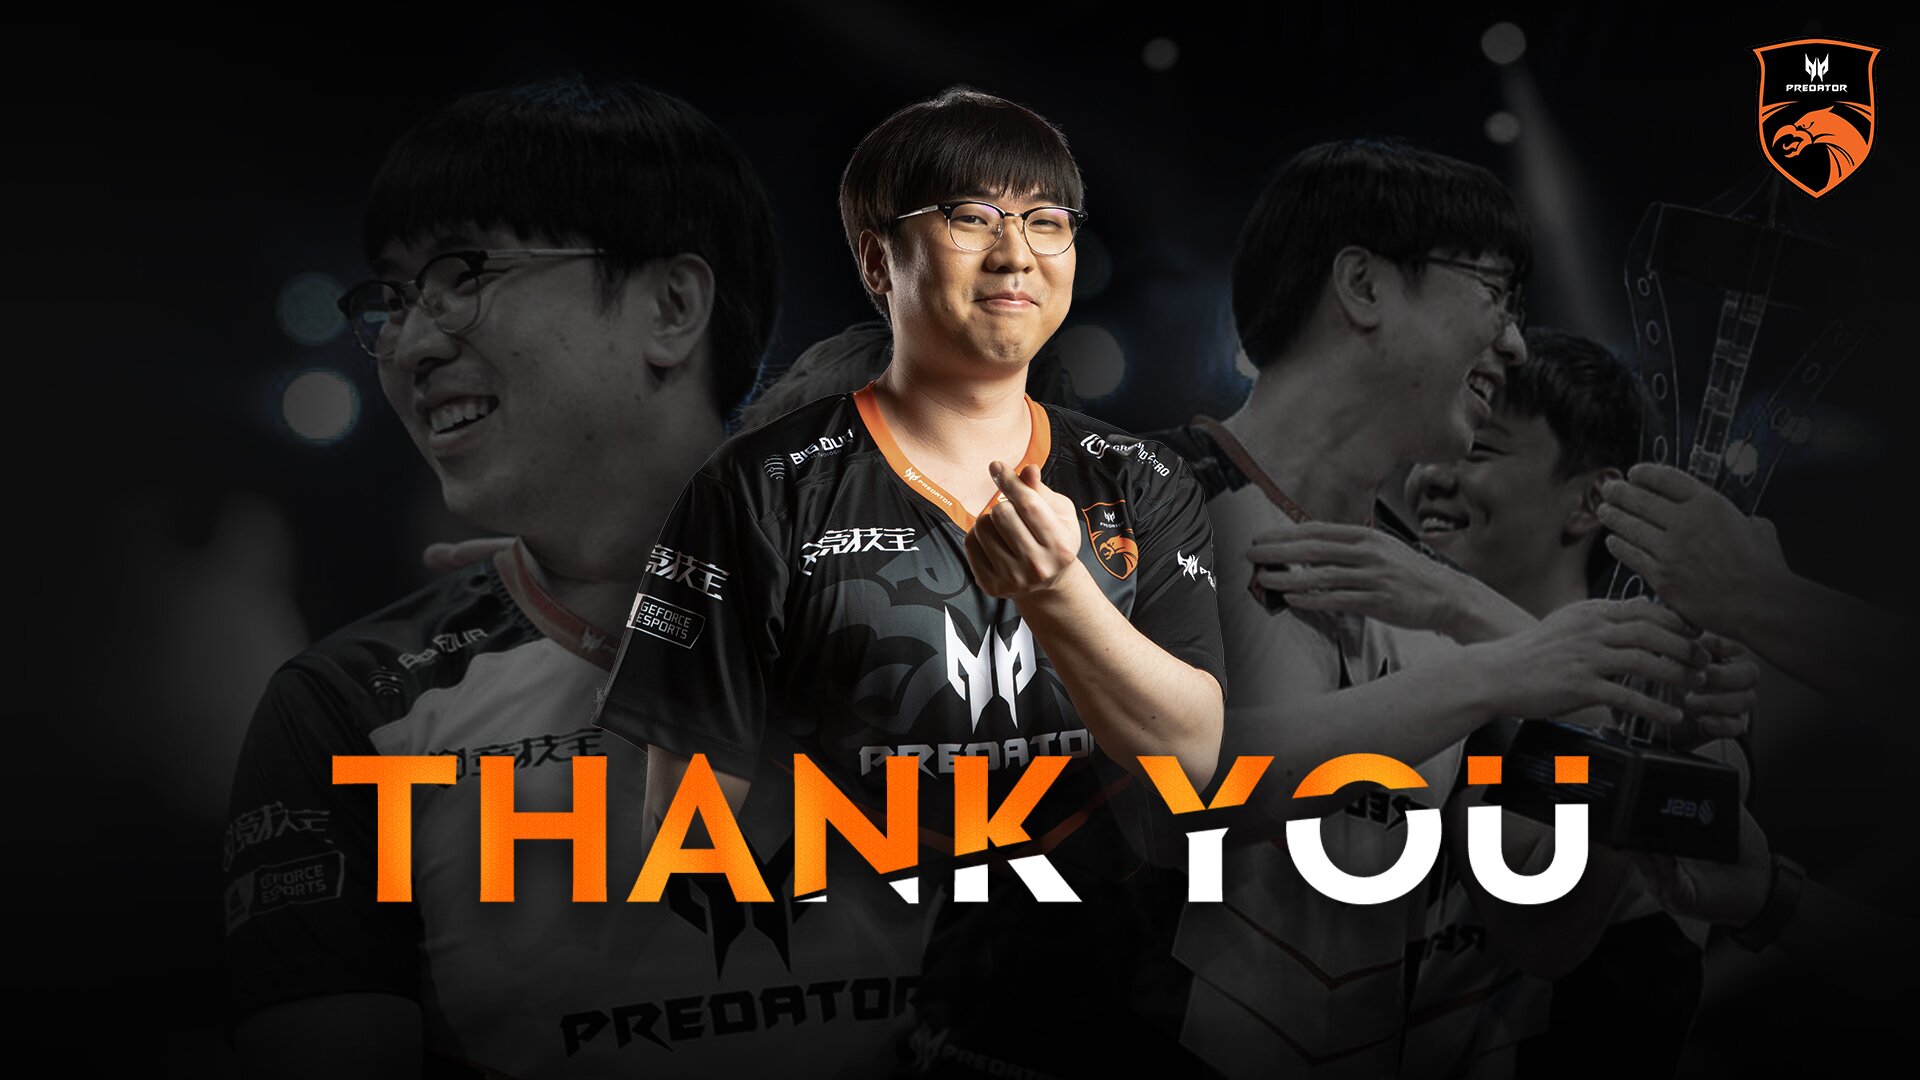 On a length post on Twitter, March said “There is an end to everything, I had a great run and met amazing teammates and people" (Image via TNC Predator)